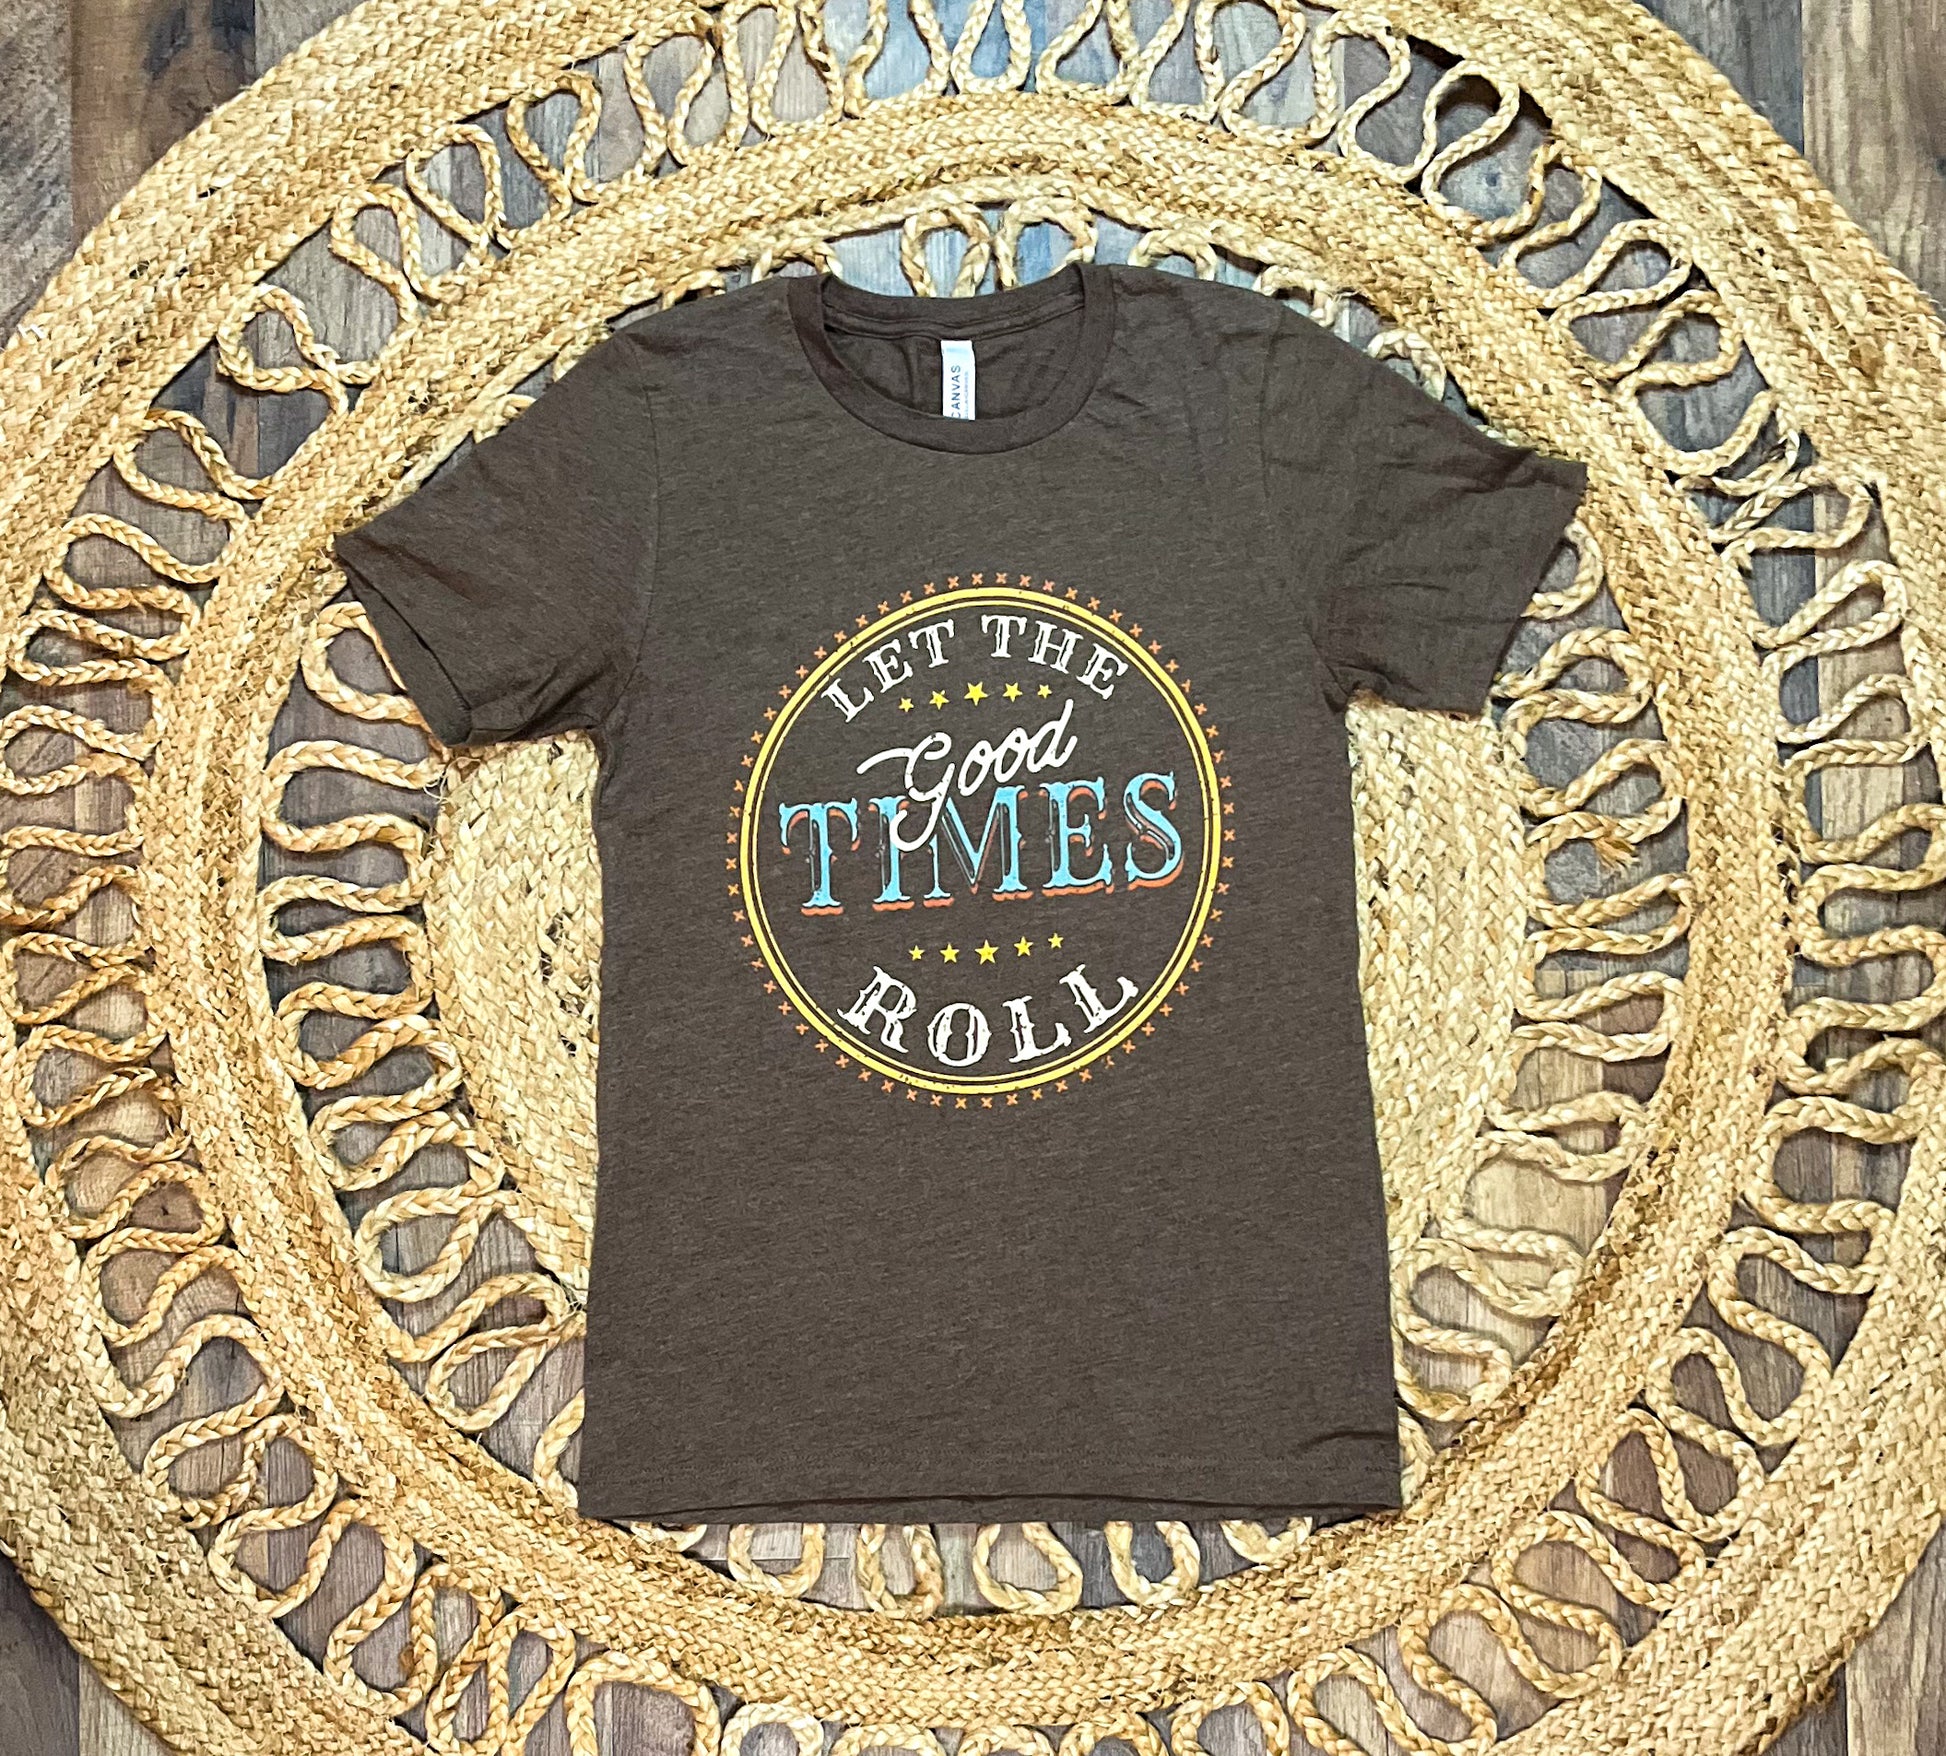 Let the Good Times Roll Vintage-inspired graphic tee